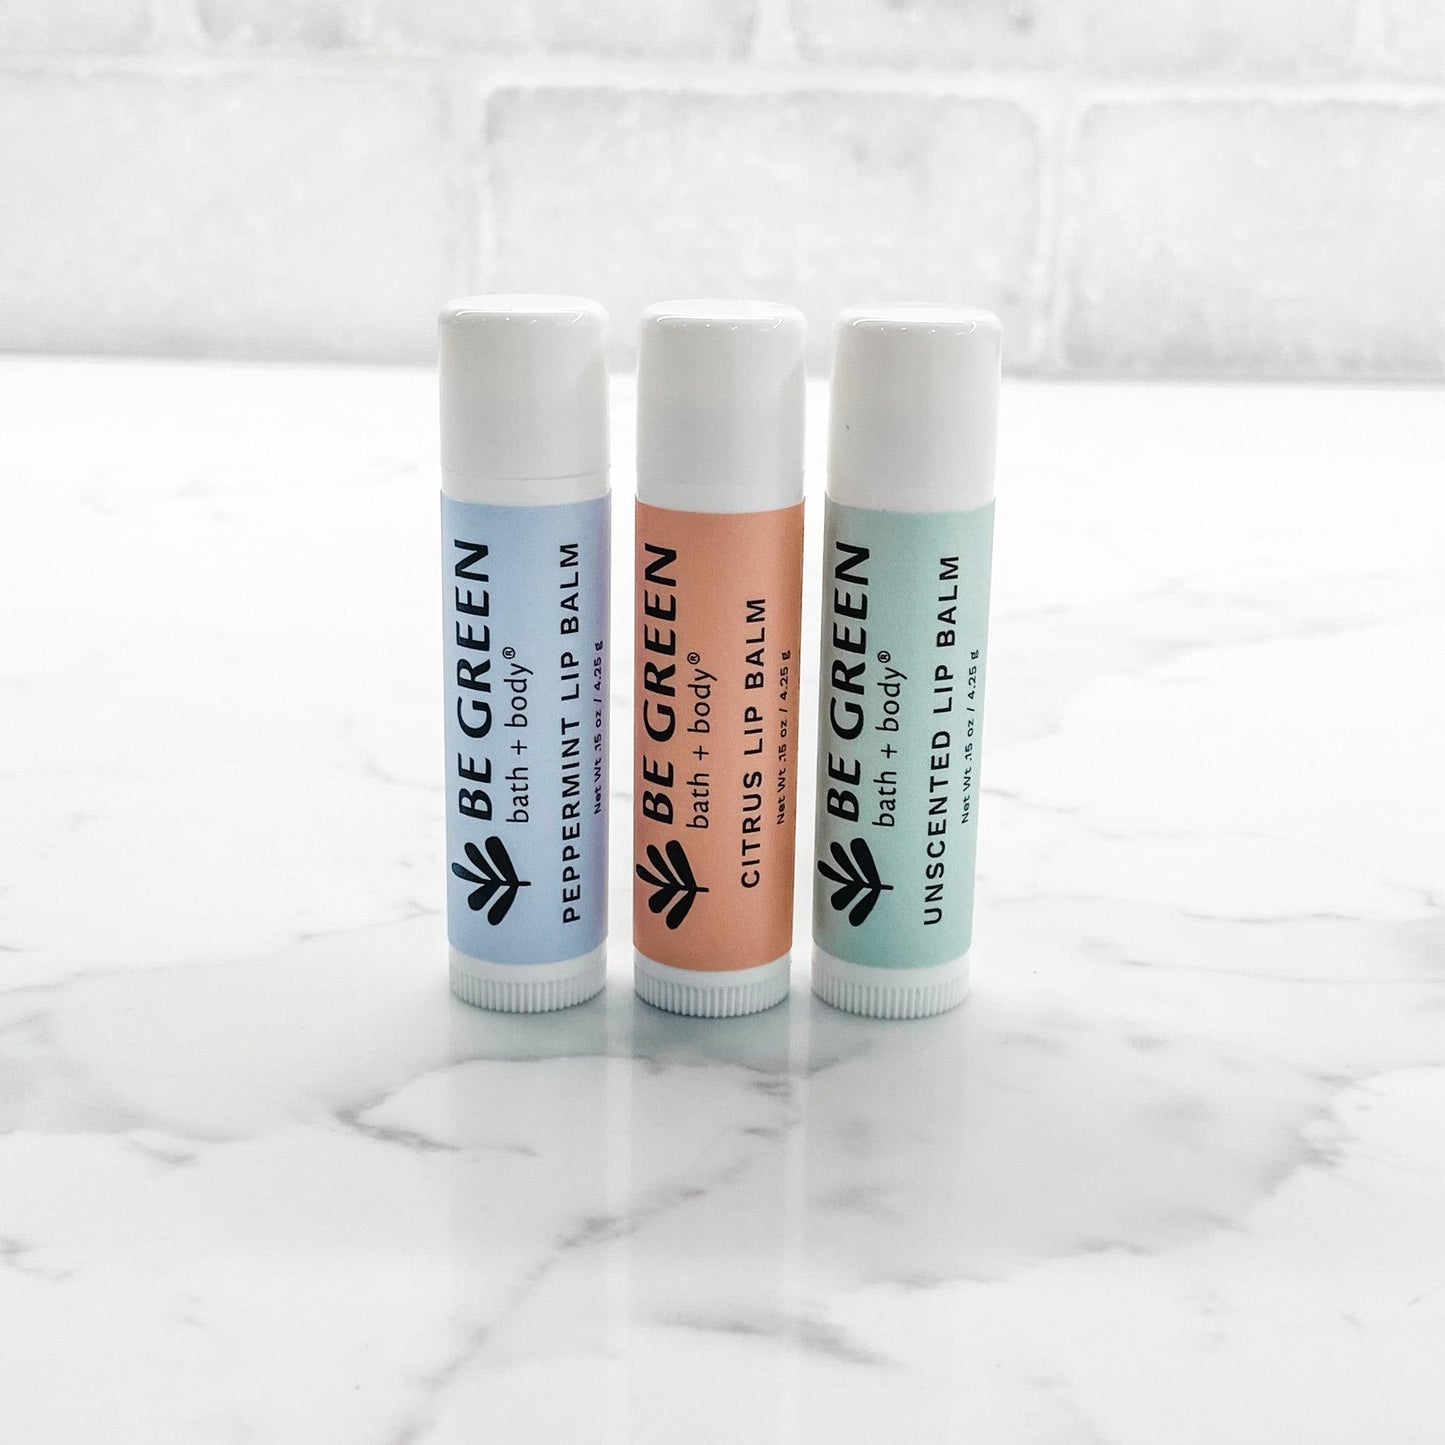 Clean beauty gift under $25- set of three natural lip balms